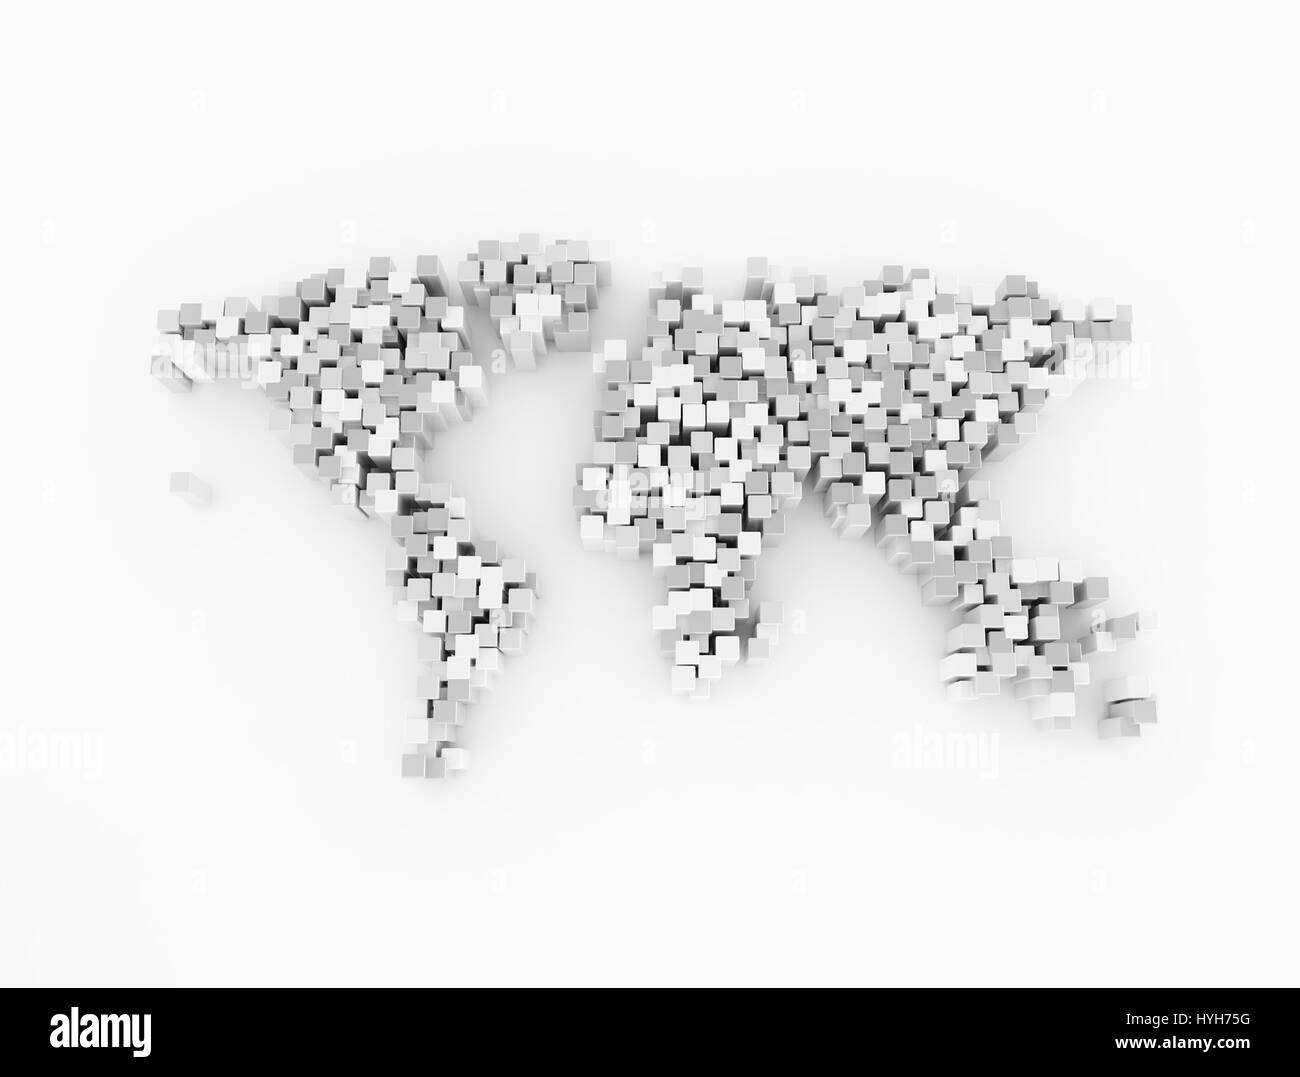 World map digital made from 3d cubes Stock Photo